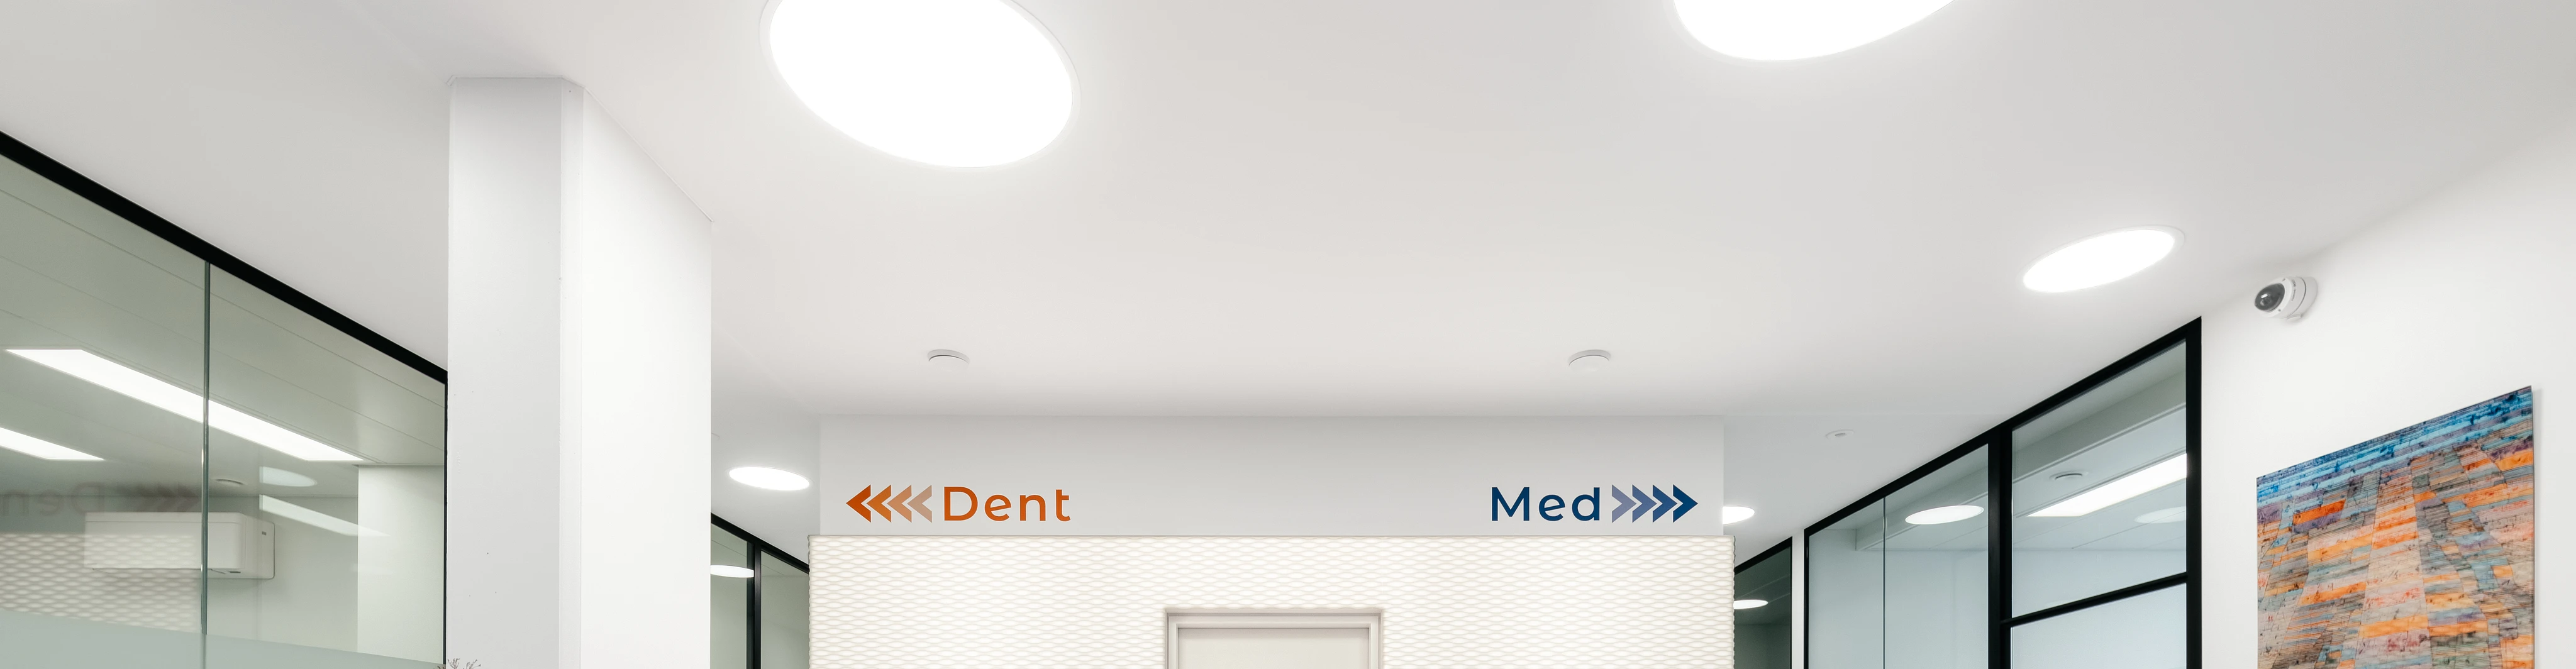 Med and Dent